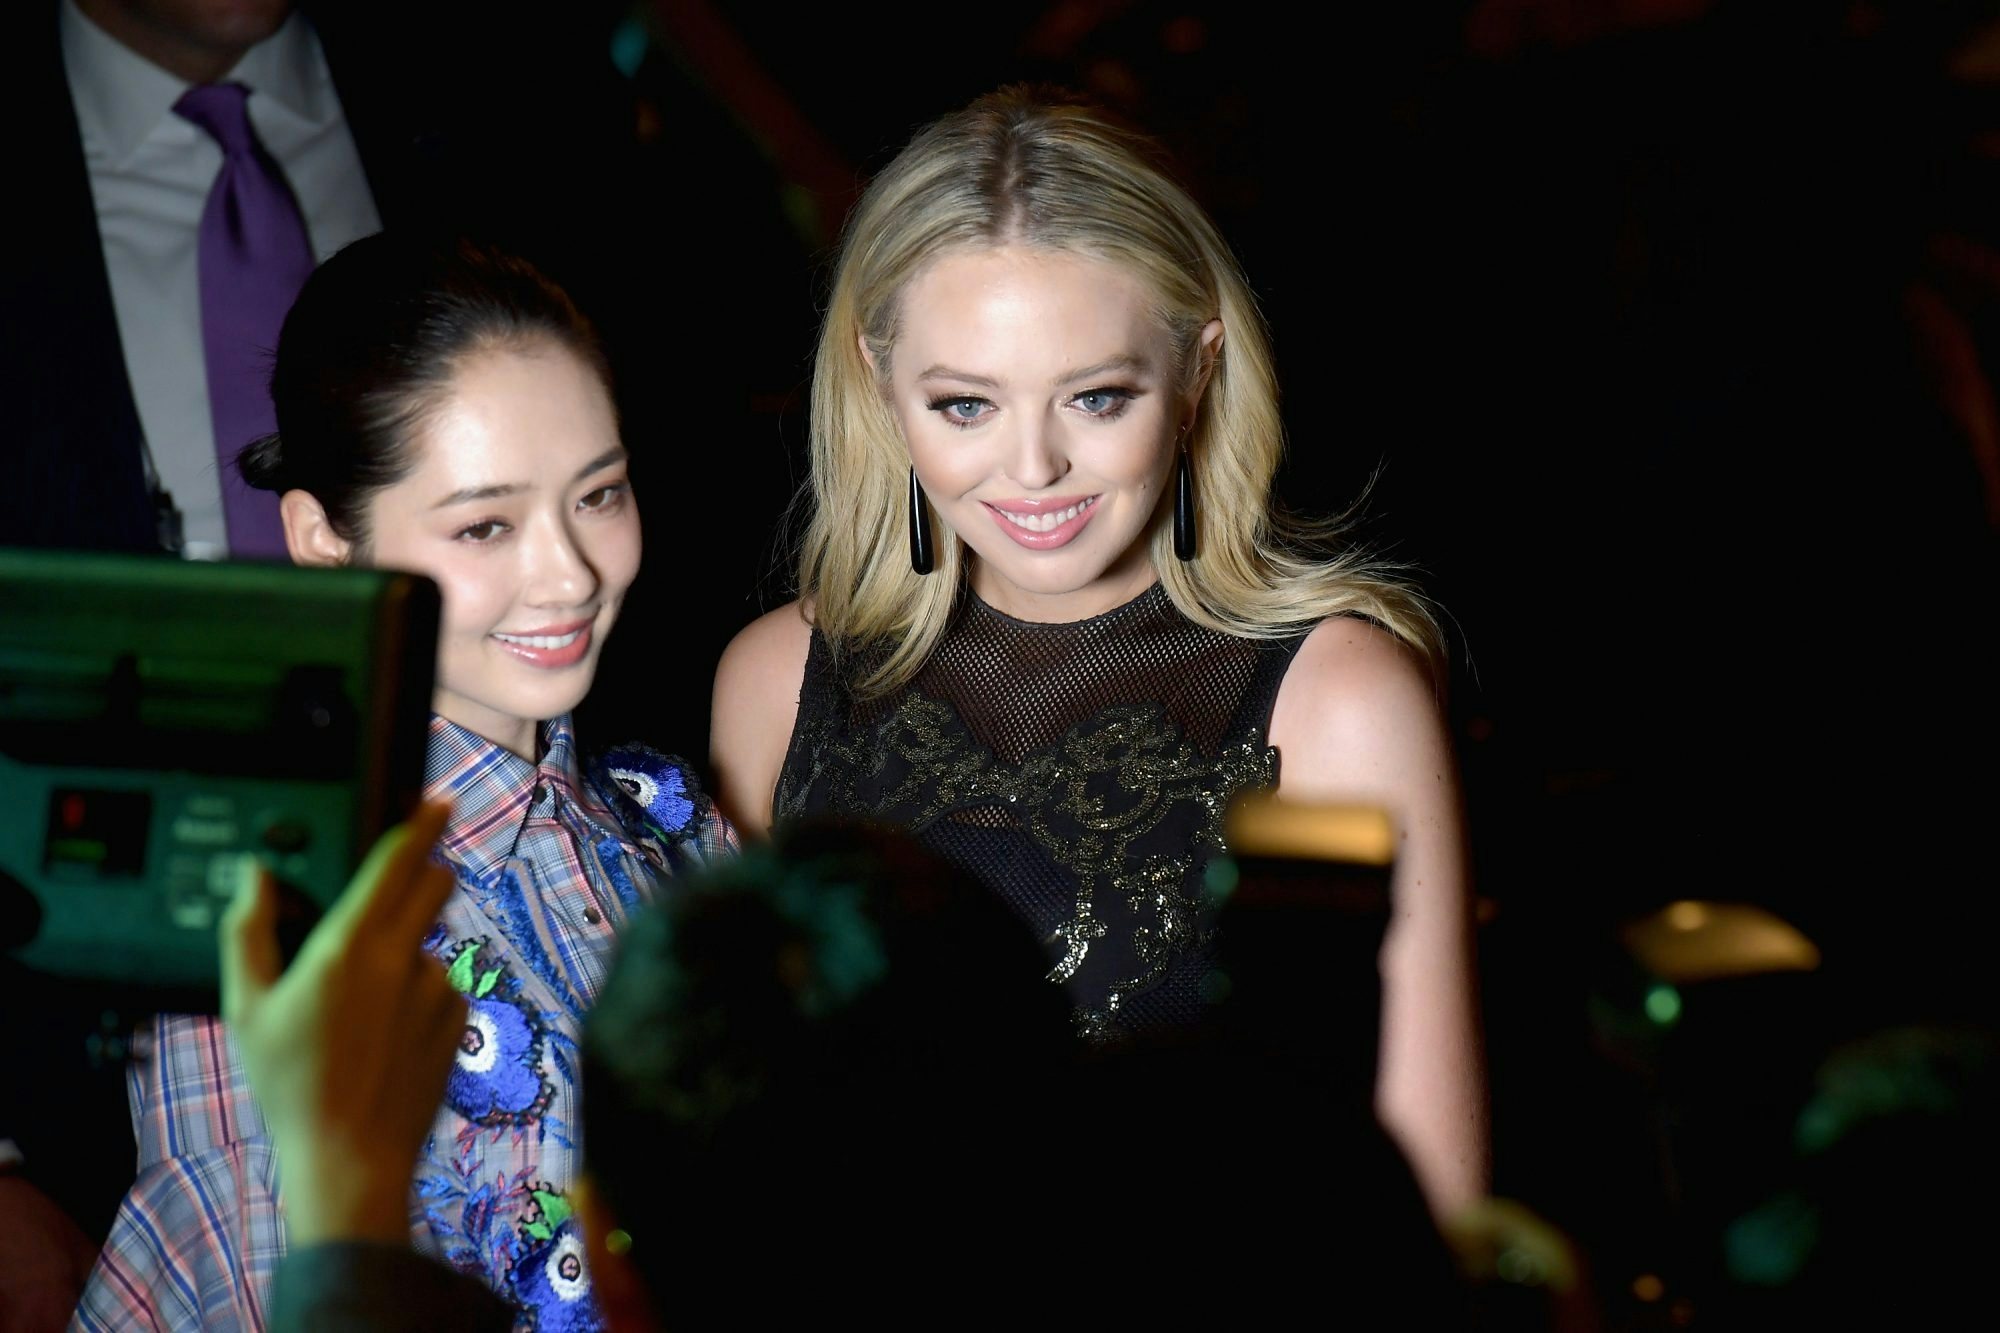 Tiffany Trump (R) attends the Vivienne Tam F/W 2017 runway show, taking a photo with Chinese actress Bea Ting Kuo (L). (Photo by Gustavo Caballero/Getty Images for Vivienne Tam)